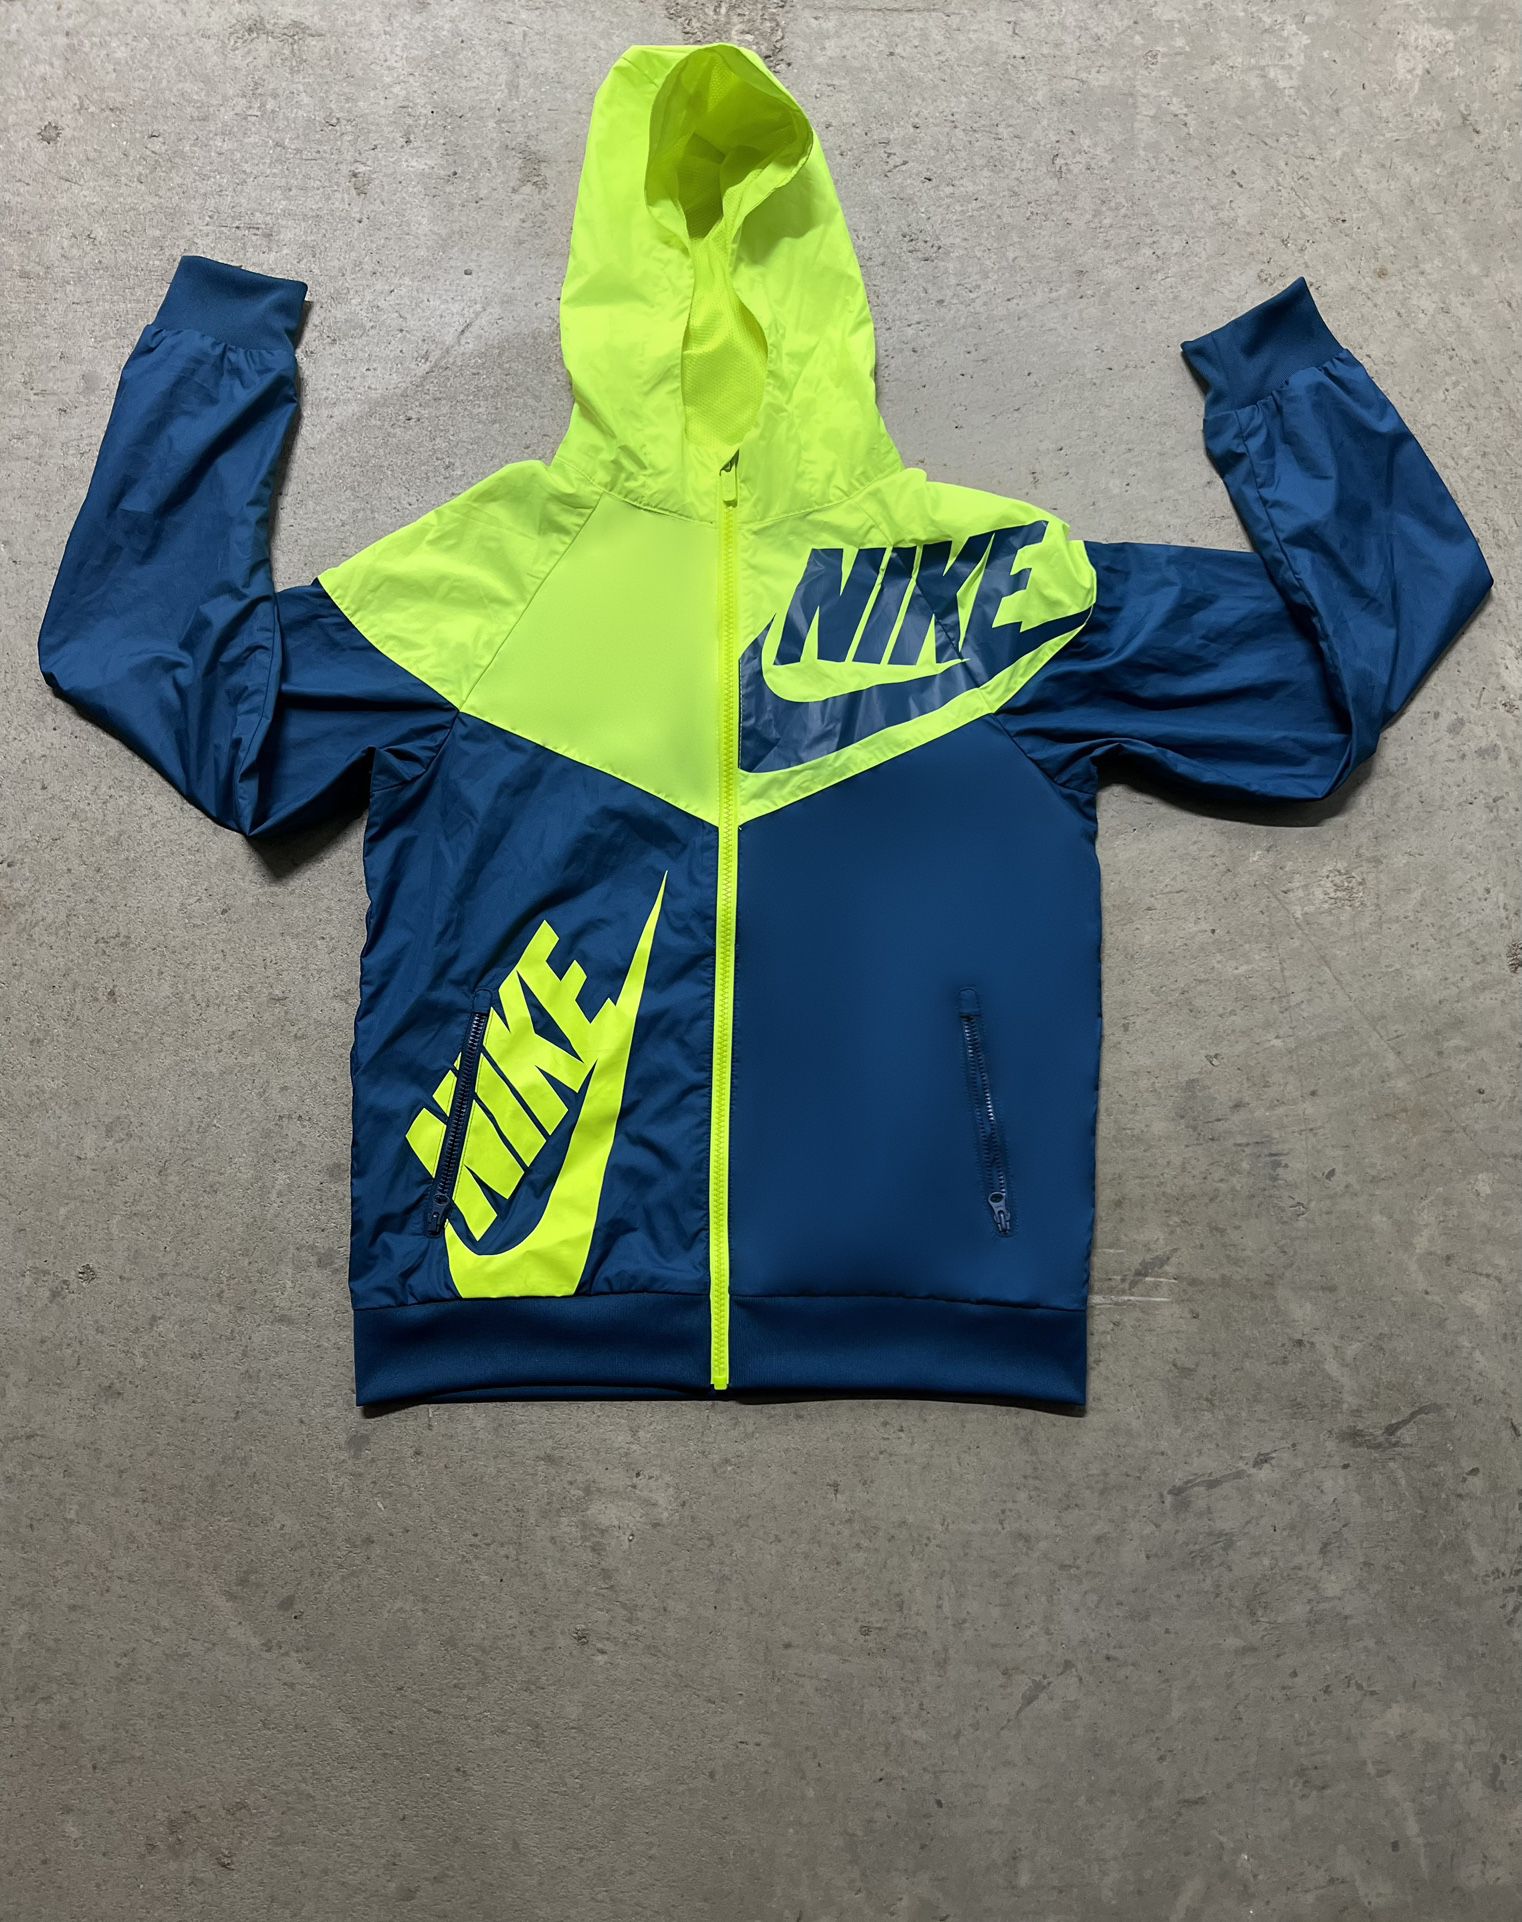 Nike Windbreaker Jacket Blue And Green Boys Youth Size L or Woman Size M